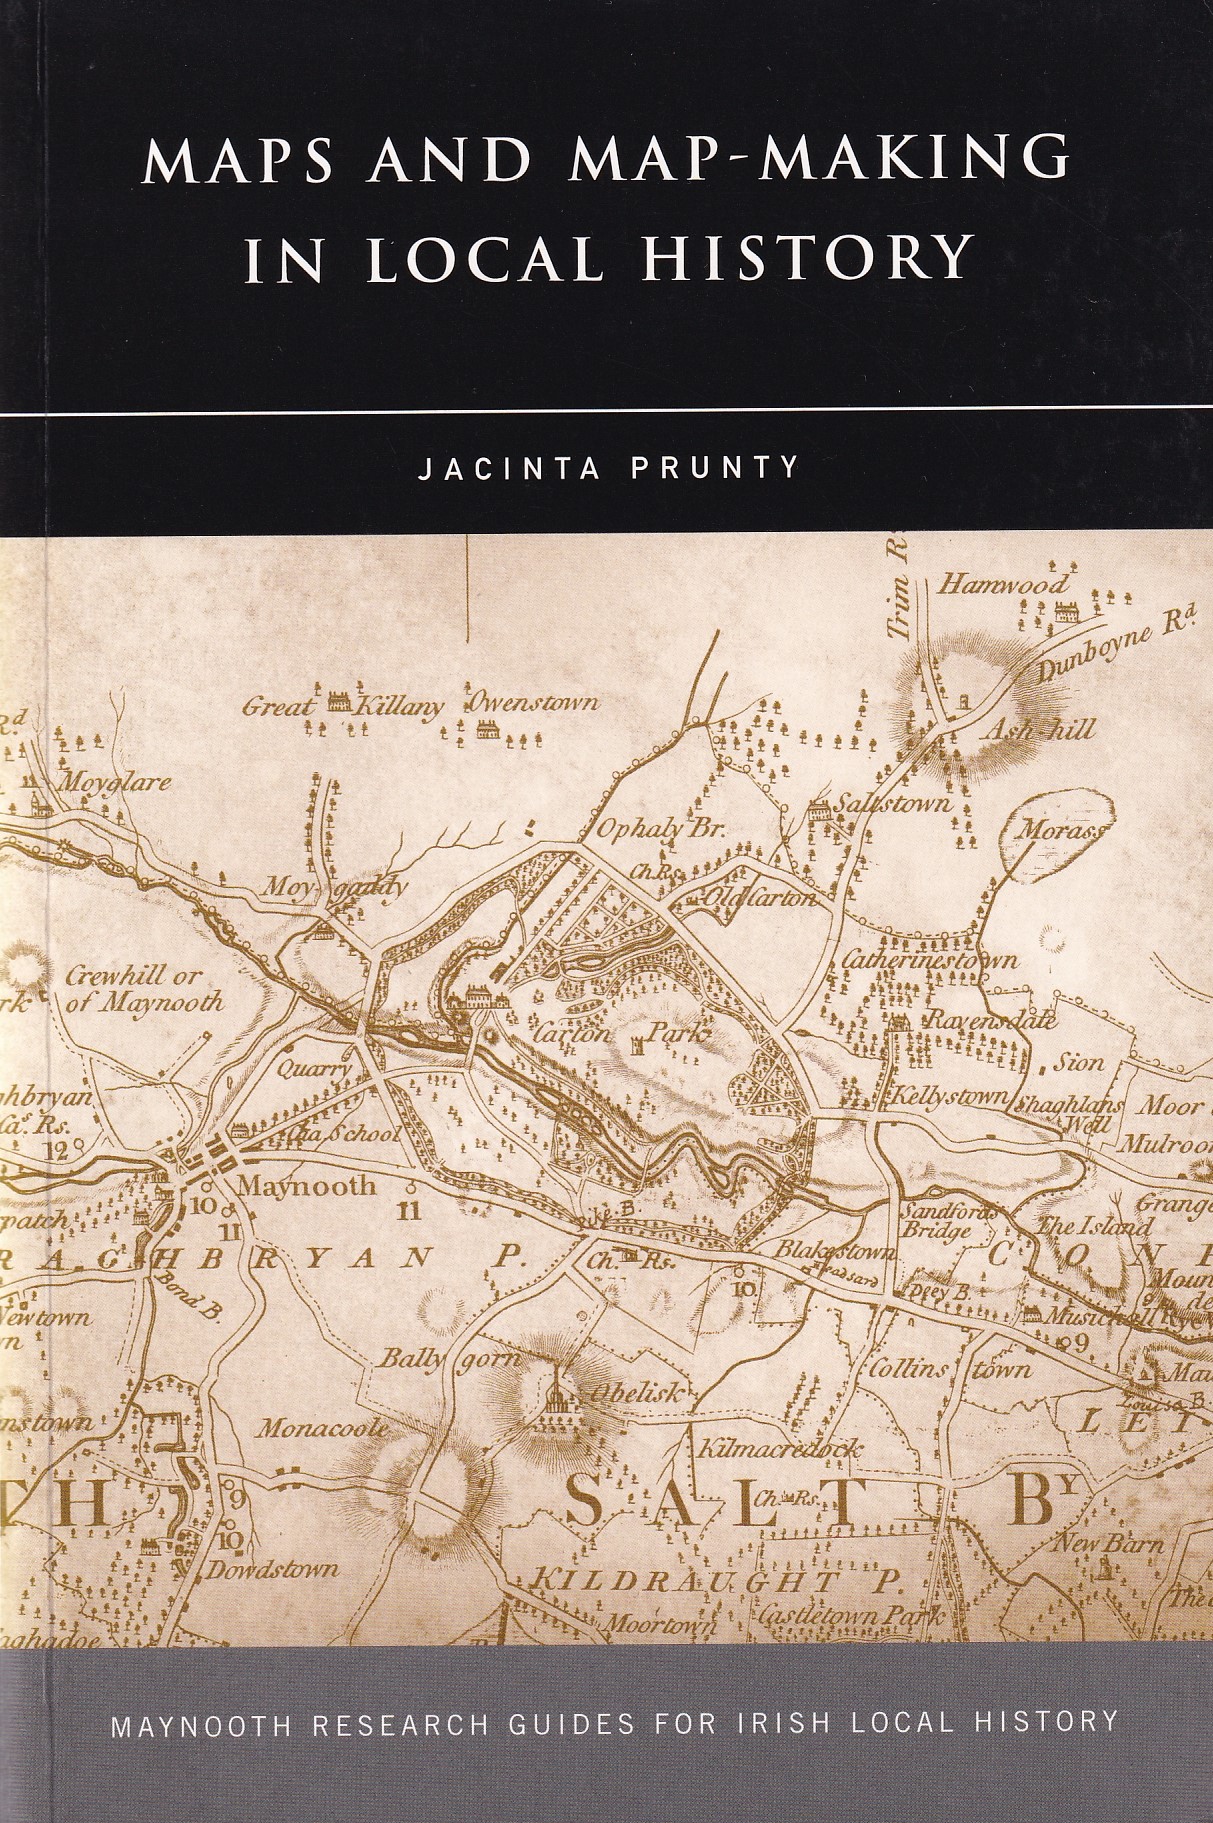 Maps and Map-Making in Local History by Jacinta Prunty